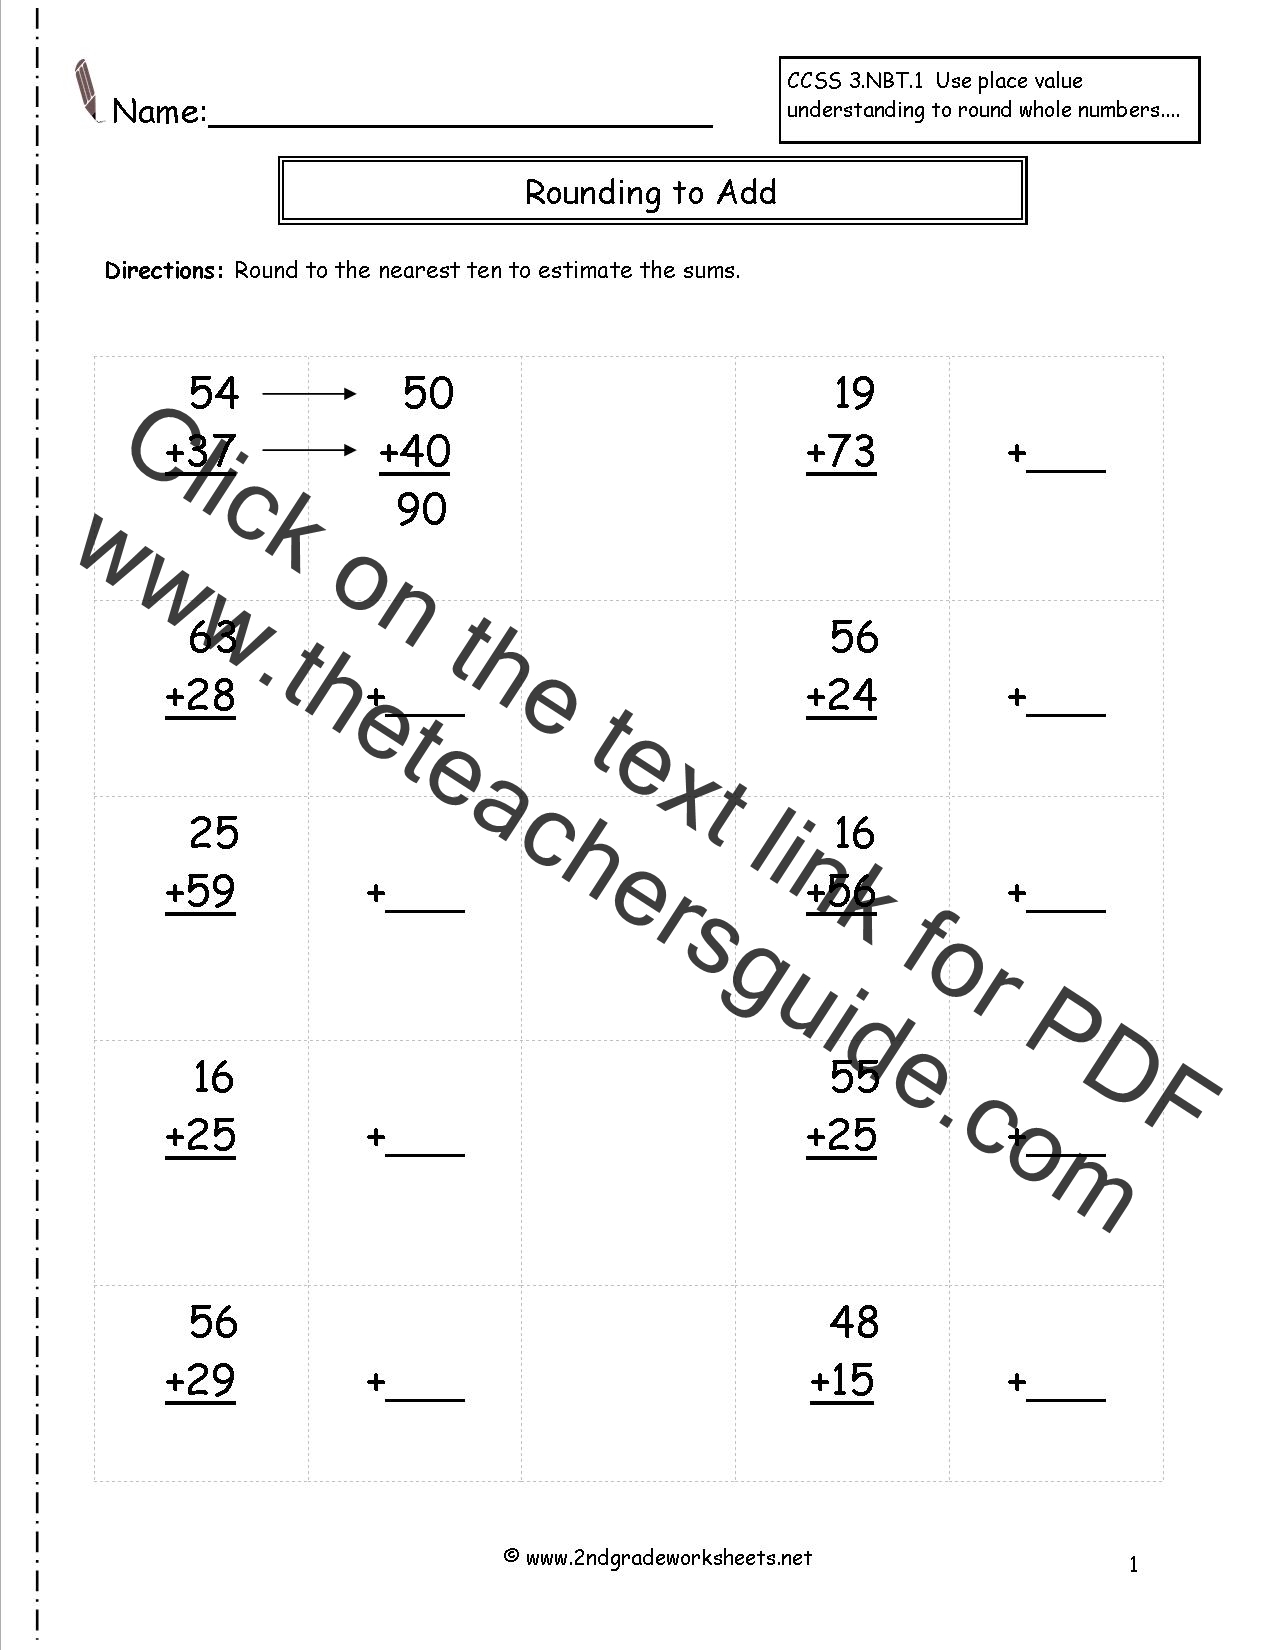 rounding-whole-numbers-worksheets